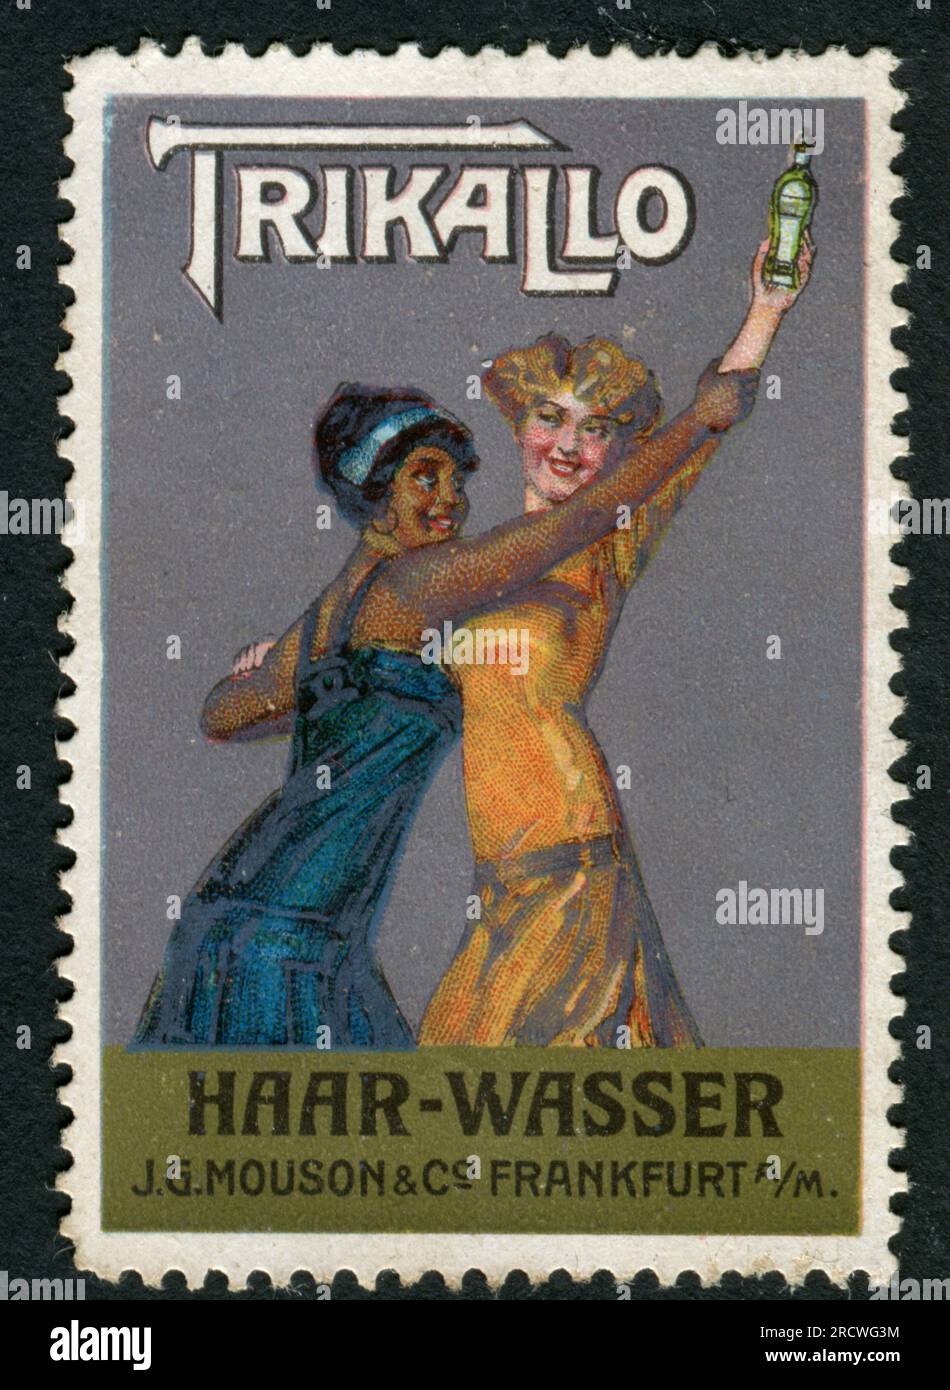 advertising, cosmetics, Trikallo hair tonic, J. G. Mouson und Co., Frankfurt am Main, poster stamp, ADDITIONAL-RIGHTS-CLEARANCE-INFO-NOT-AVAILABLE Stock Photo